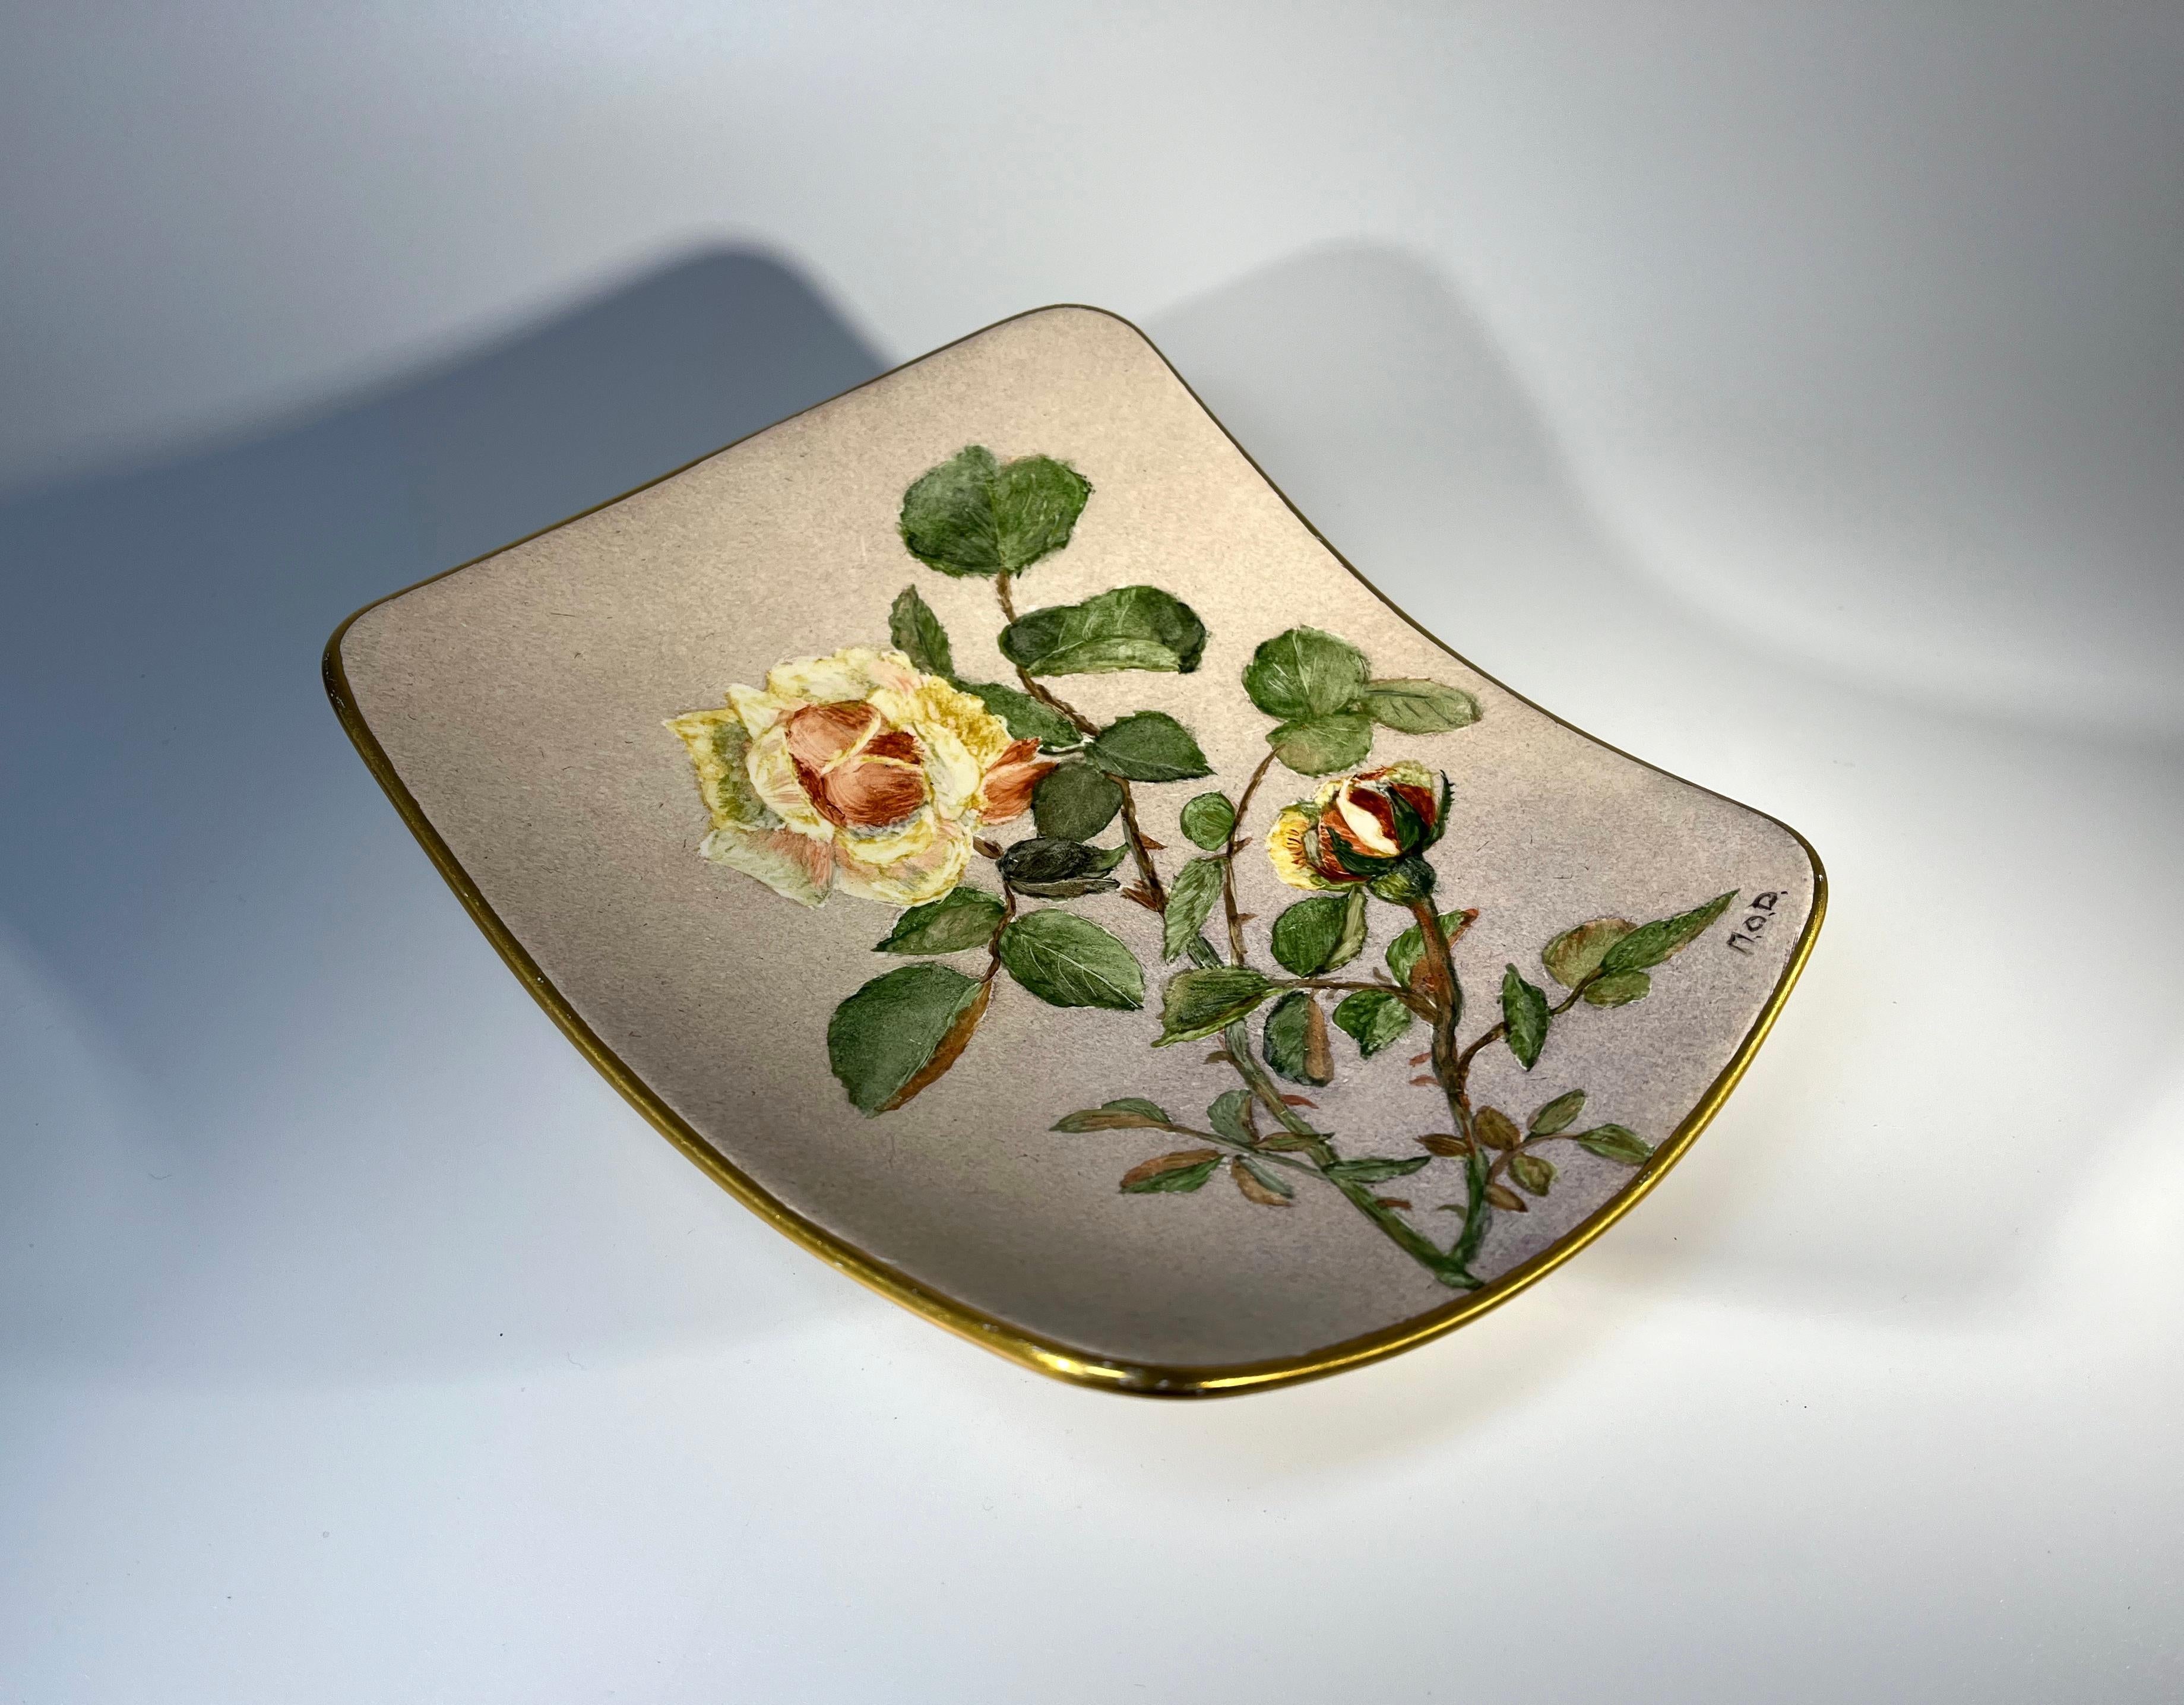 Effortlessly feminine ceramic tripod dish or vide poche, hand decorated with a beautiful detailed rose sprig
Stands on three gilded feet with gilded band to rim
Background is a warm matt oatmeal hue
Circa 1970's
Signed MOD
Height 2 inch, Width 5.5